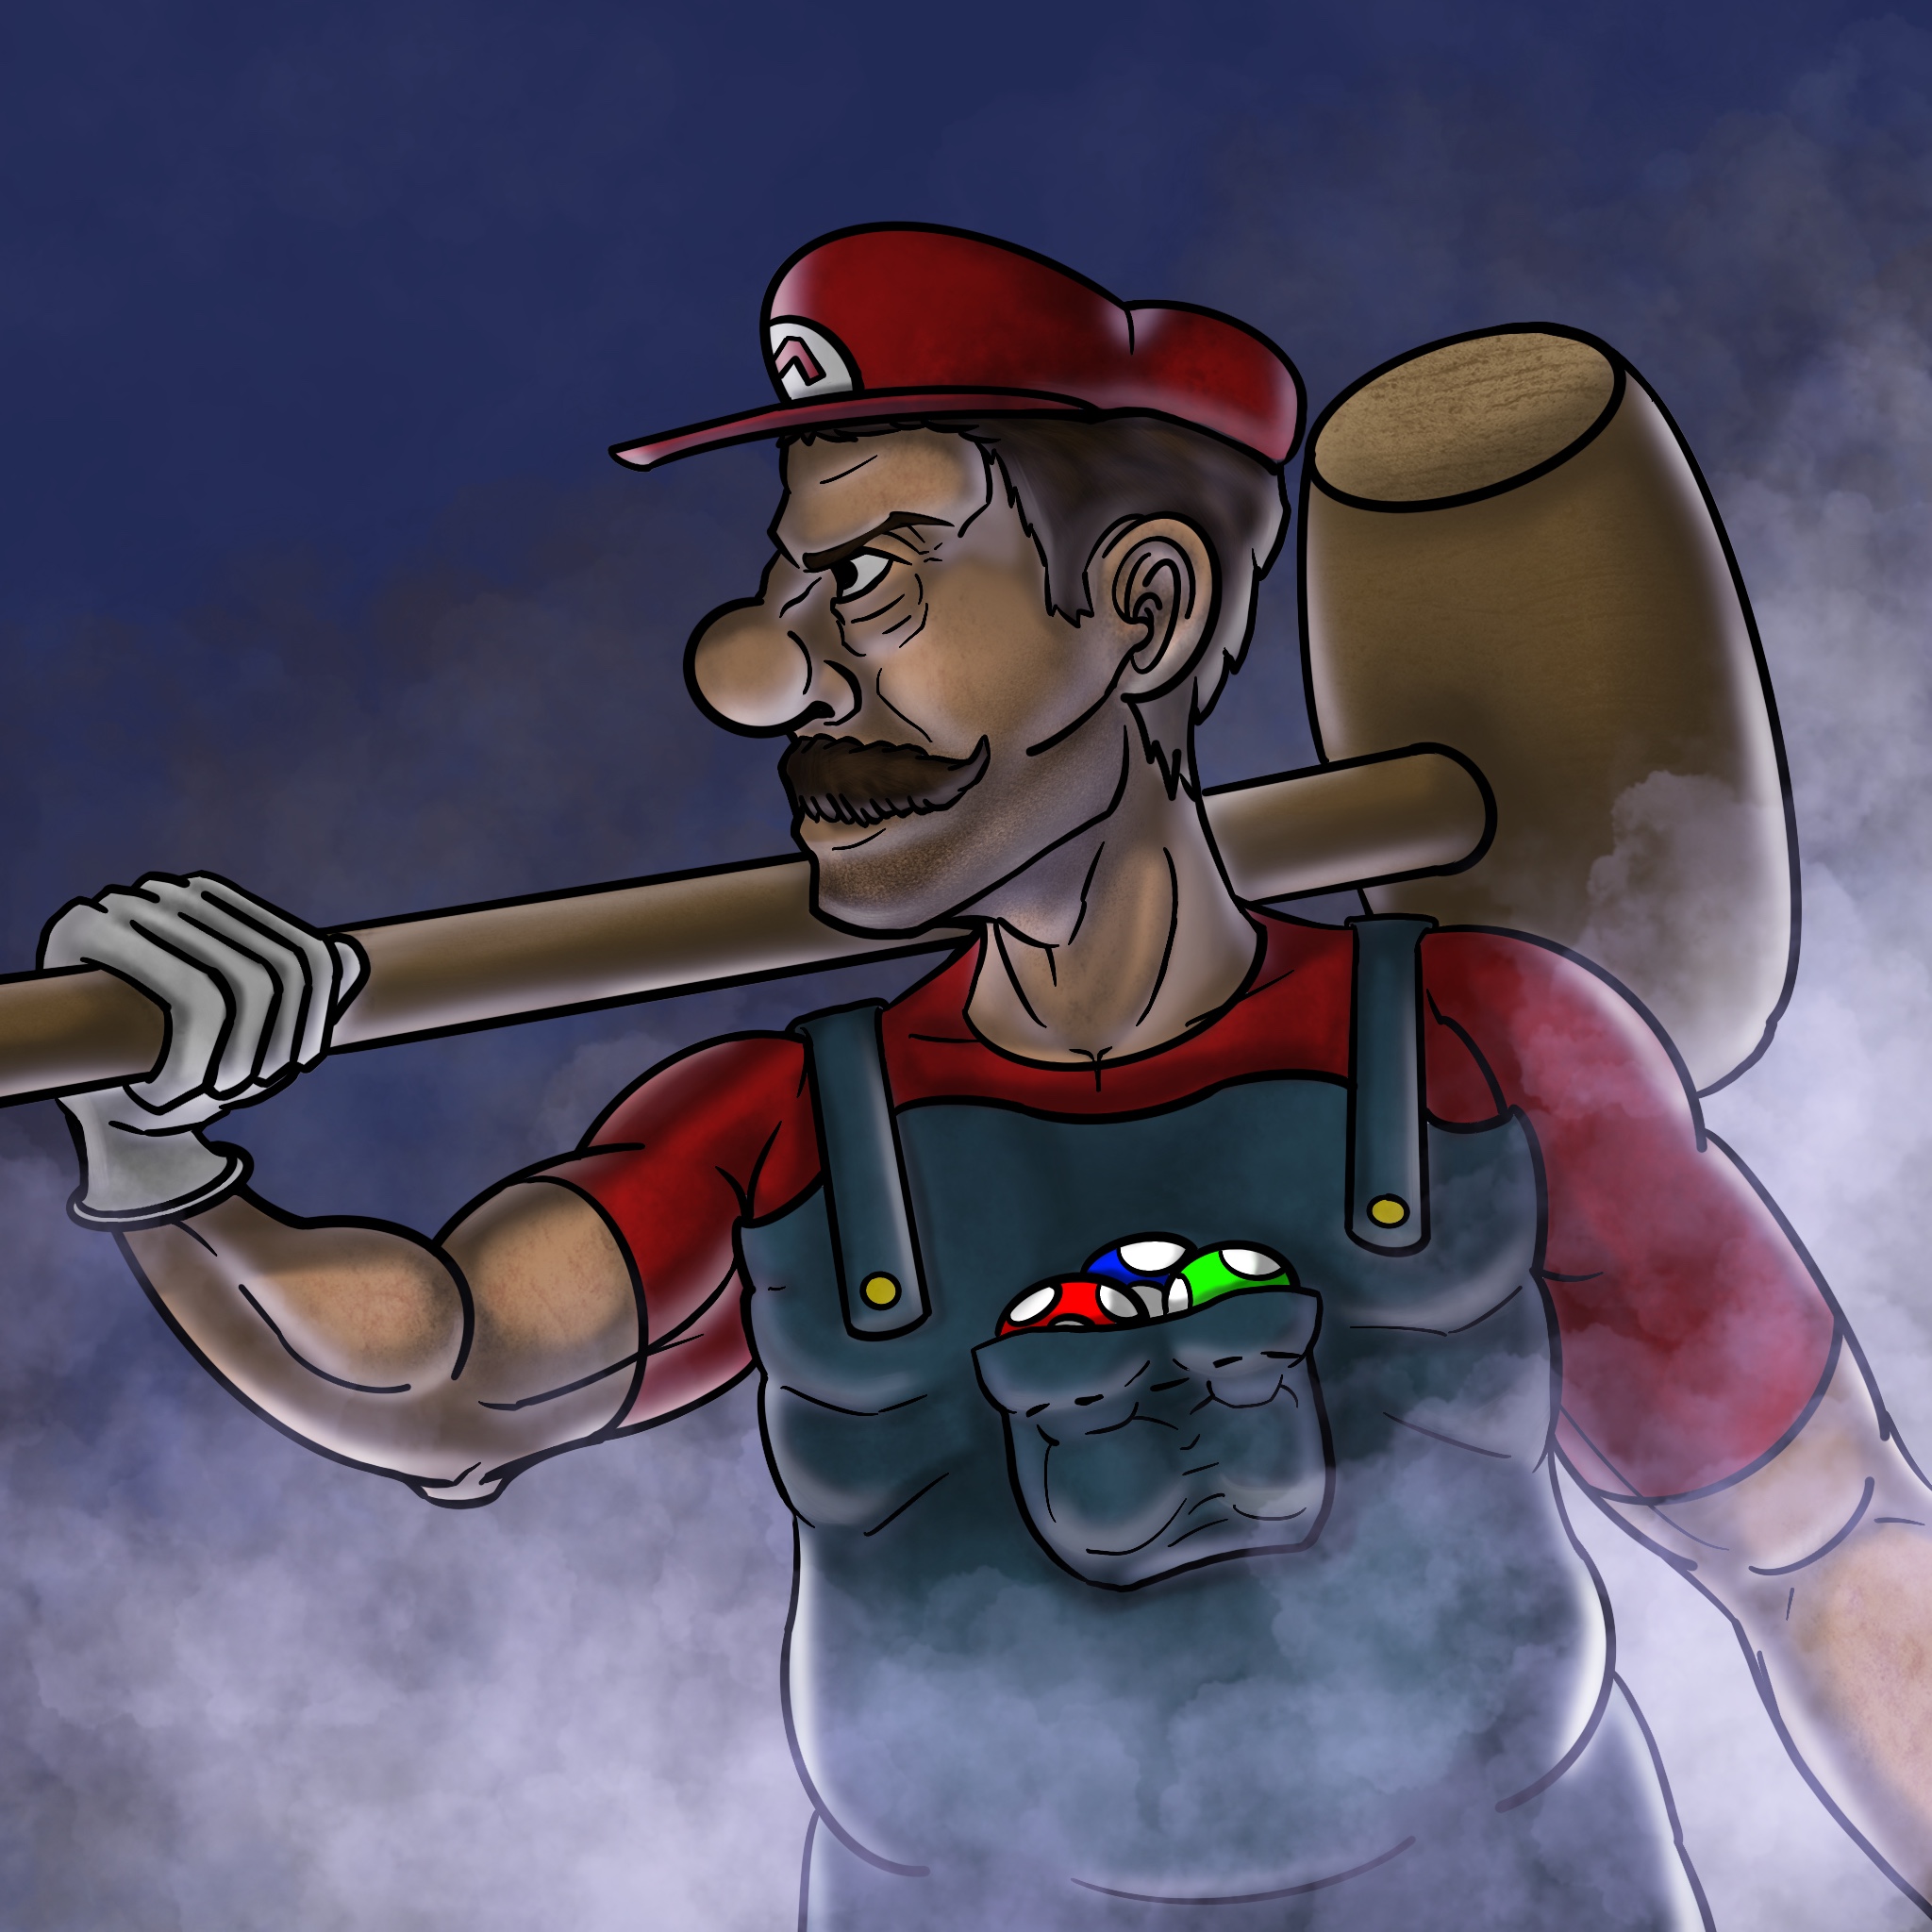 I was in high school the first time I drew Mario as a realistic person living in a post-apocalyptic Mushroom Kingdom. Nearly a decade later I finally rendered a complete version of that idea. I tend to avoid drawing backgrounds as you can see, so clouds and colors it is!